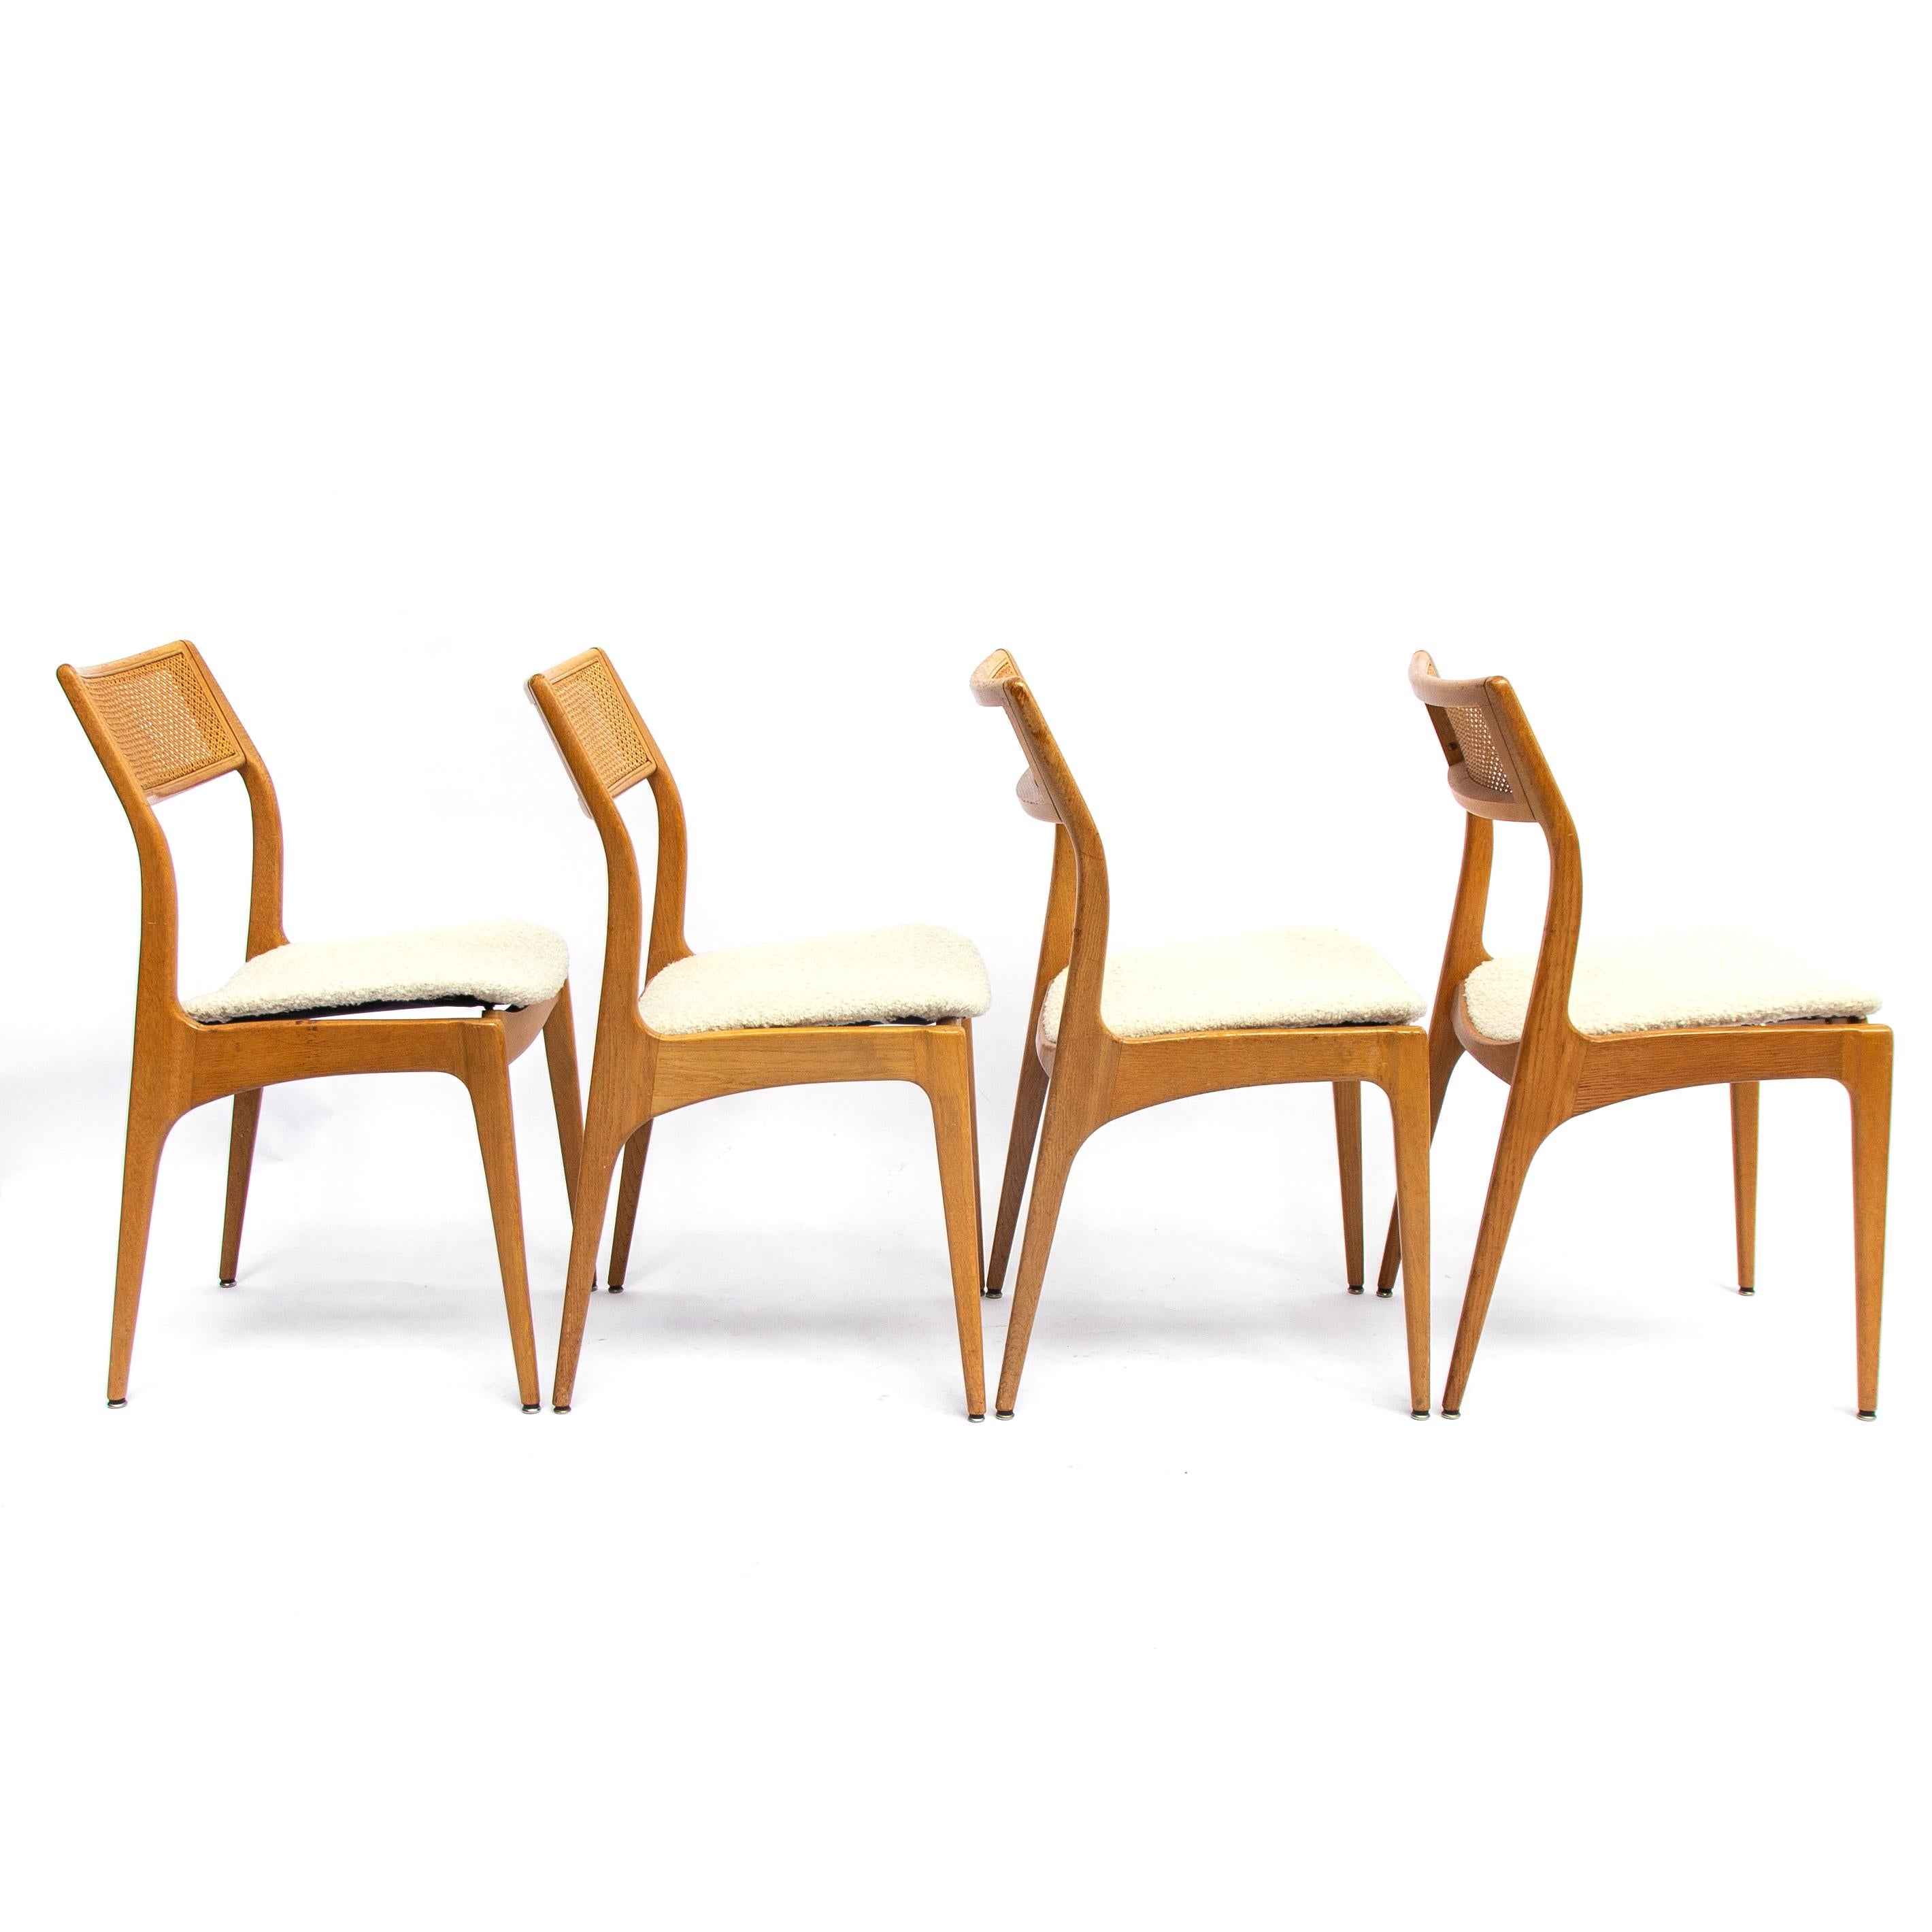 Set of four Danish midcentury oak dining chairs with a webbing back newly upholstered. The typical soft feminine shaped edges refer to the populair Danish hand of design. These chairs are special with the diagonal webbing back. Production date app